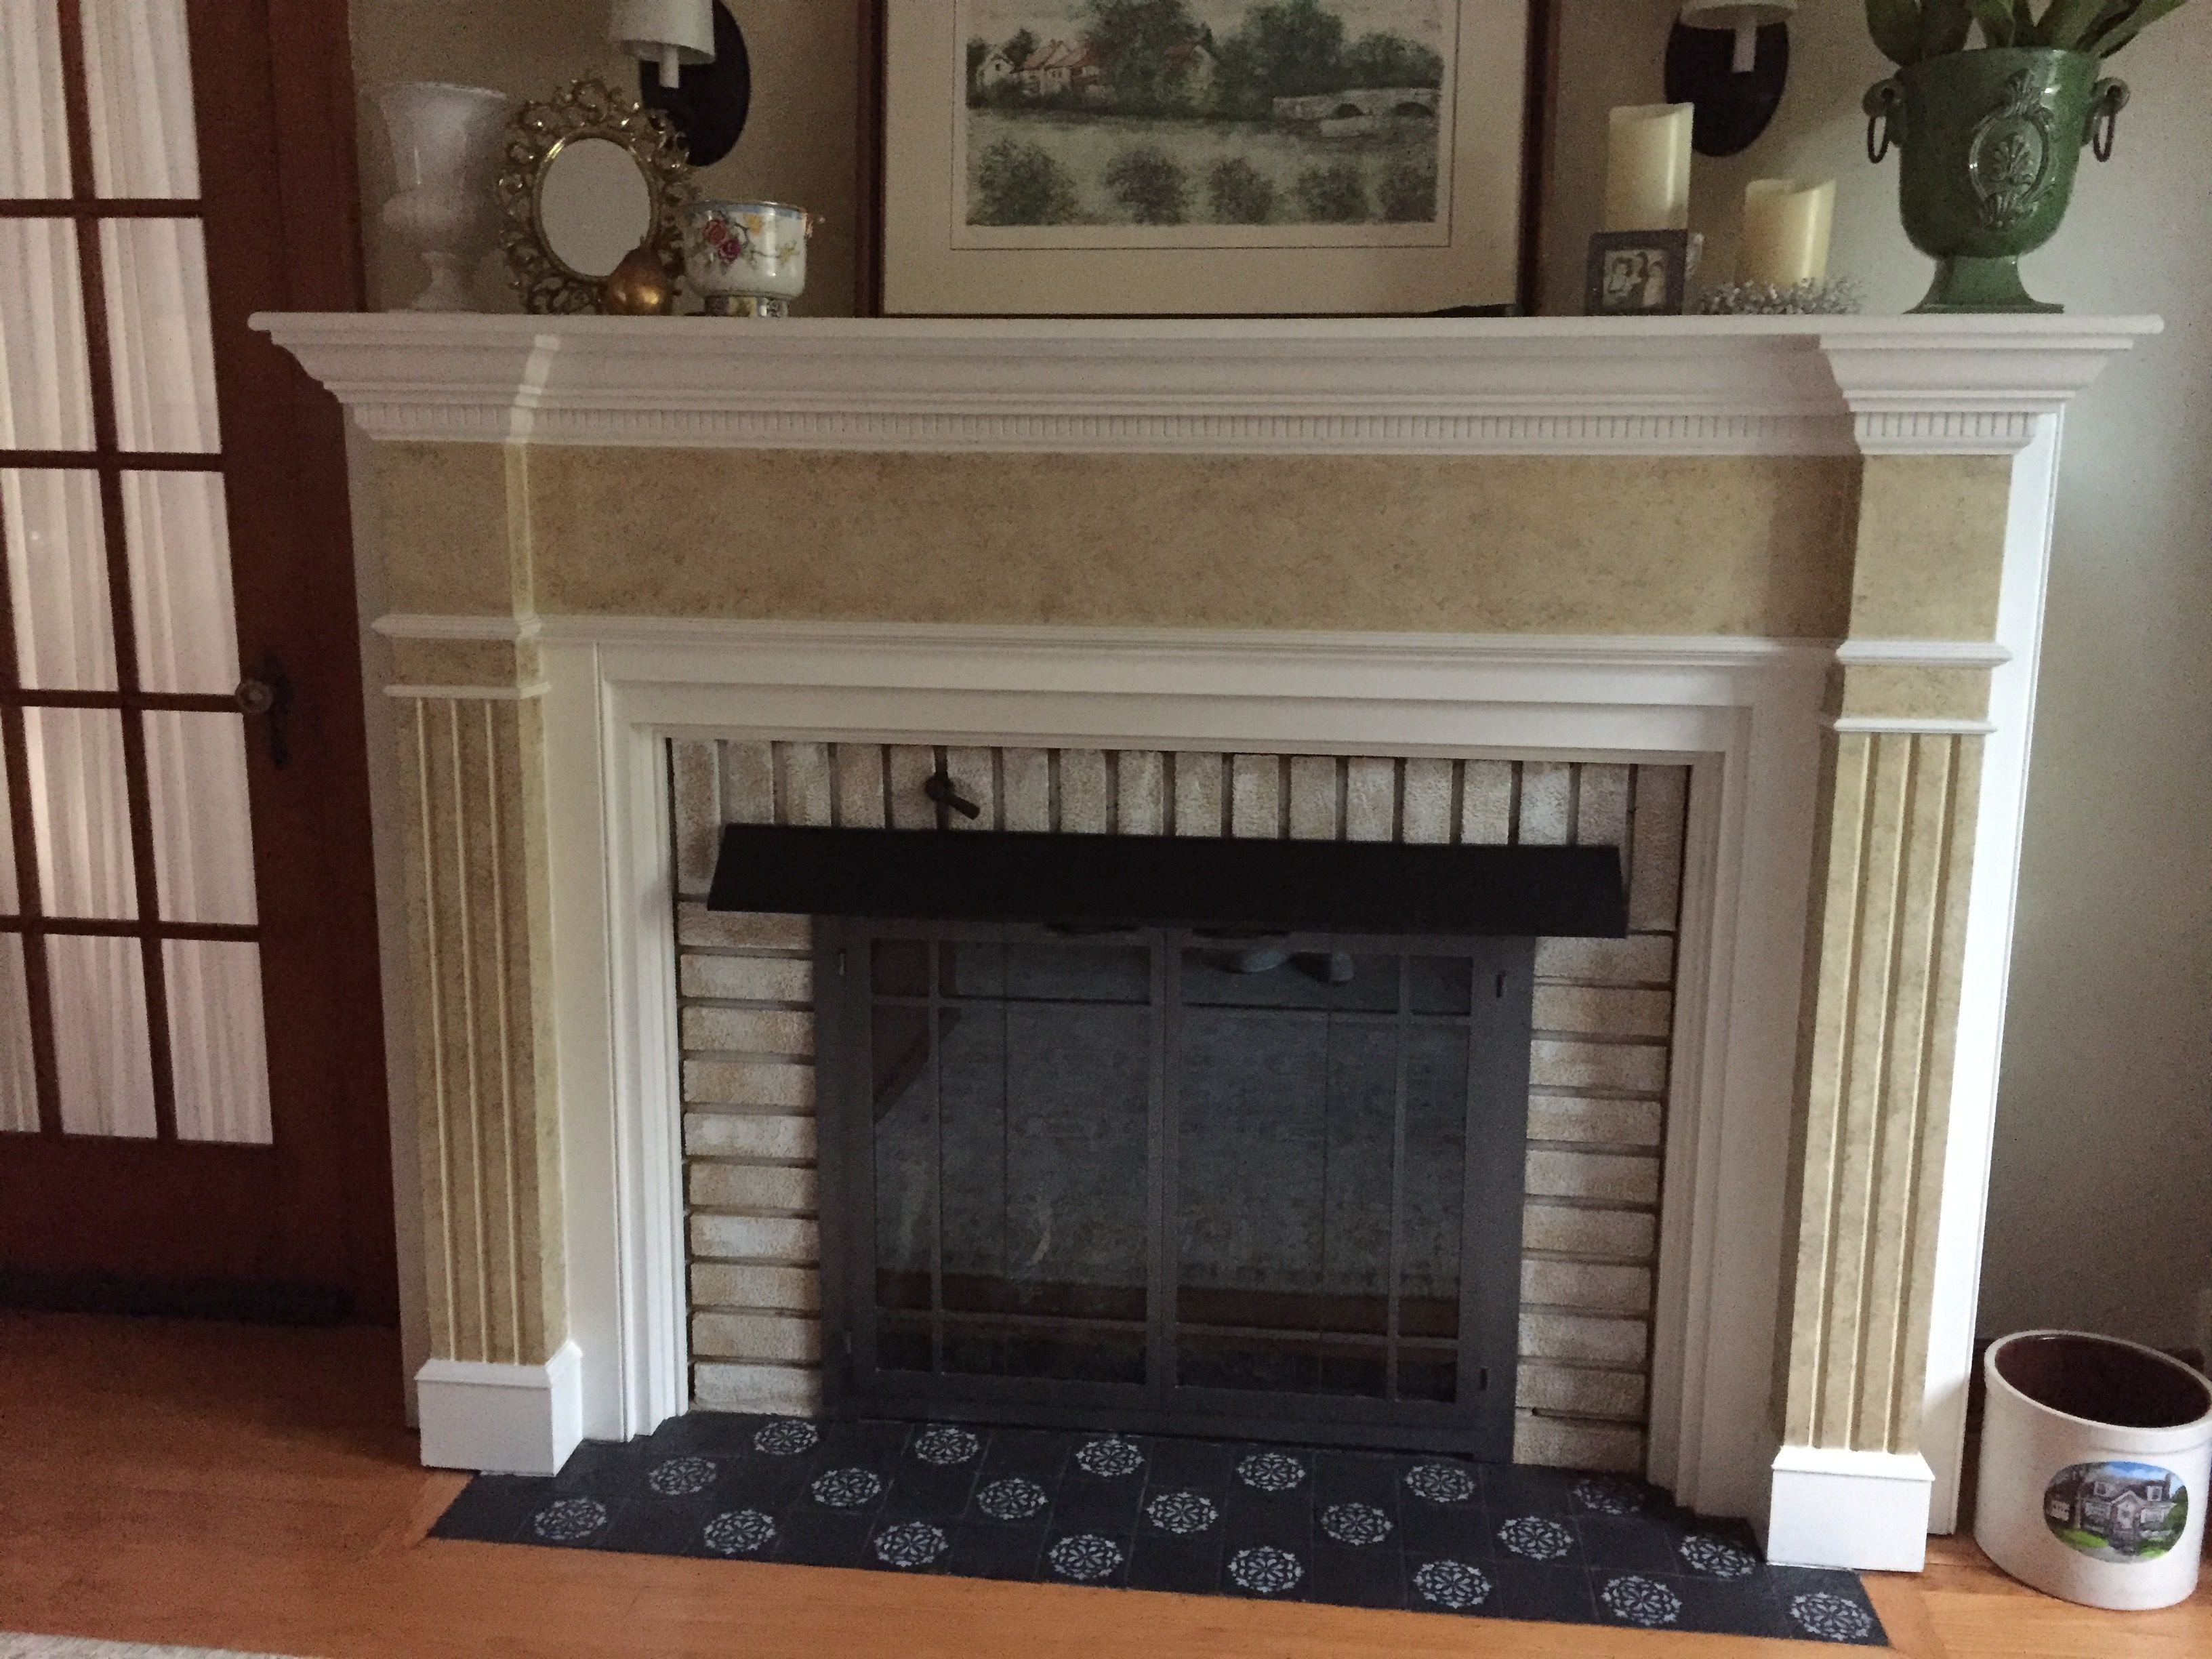 Fireplace Cover Up Best Of Stencil Over Black Tile Just to Jazz Up the Fireplace